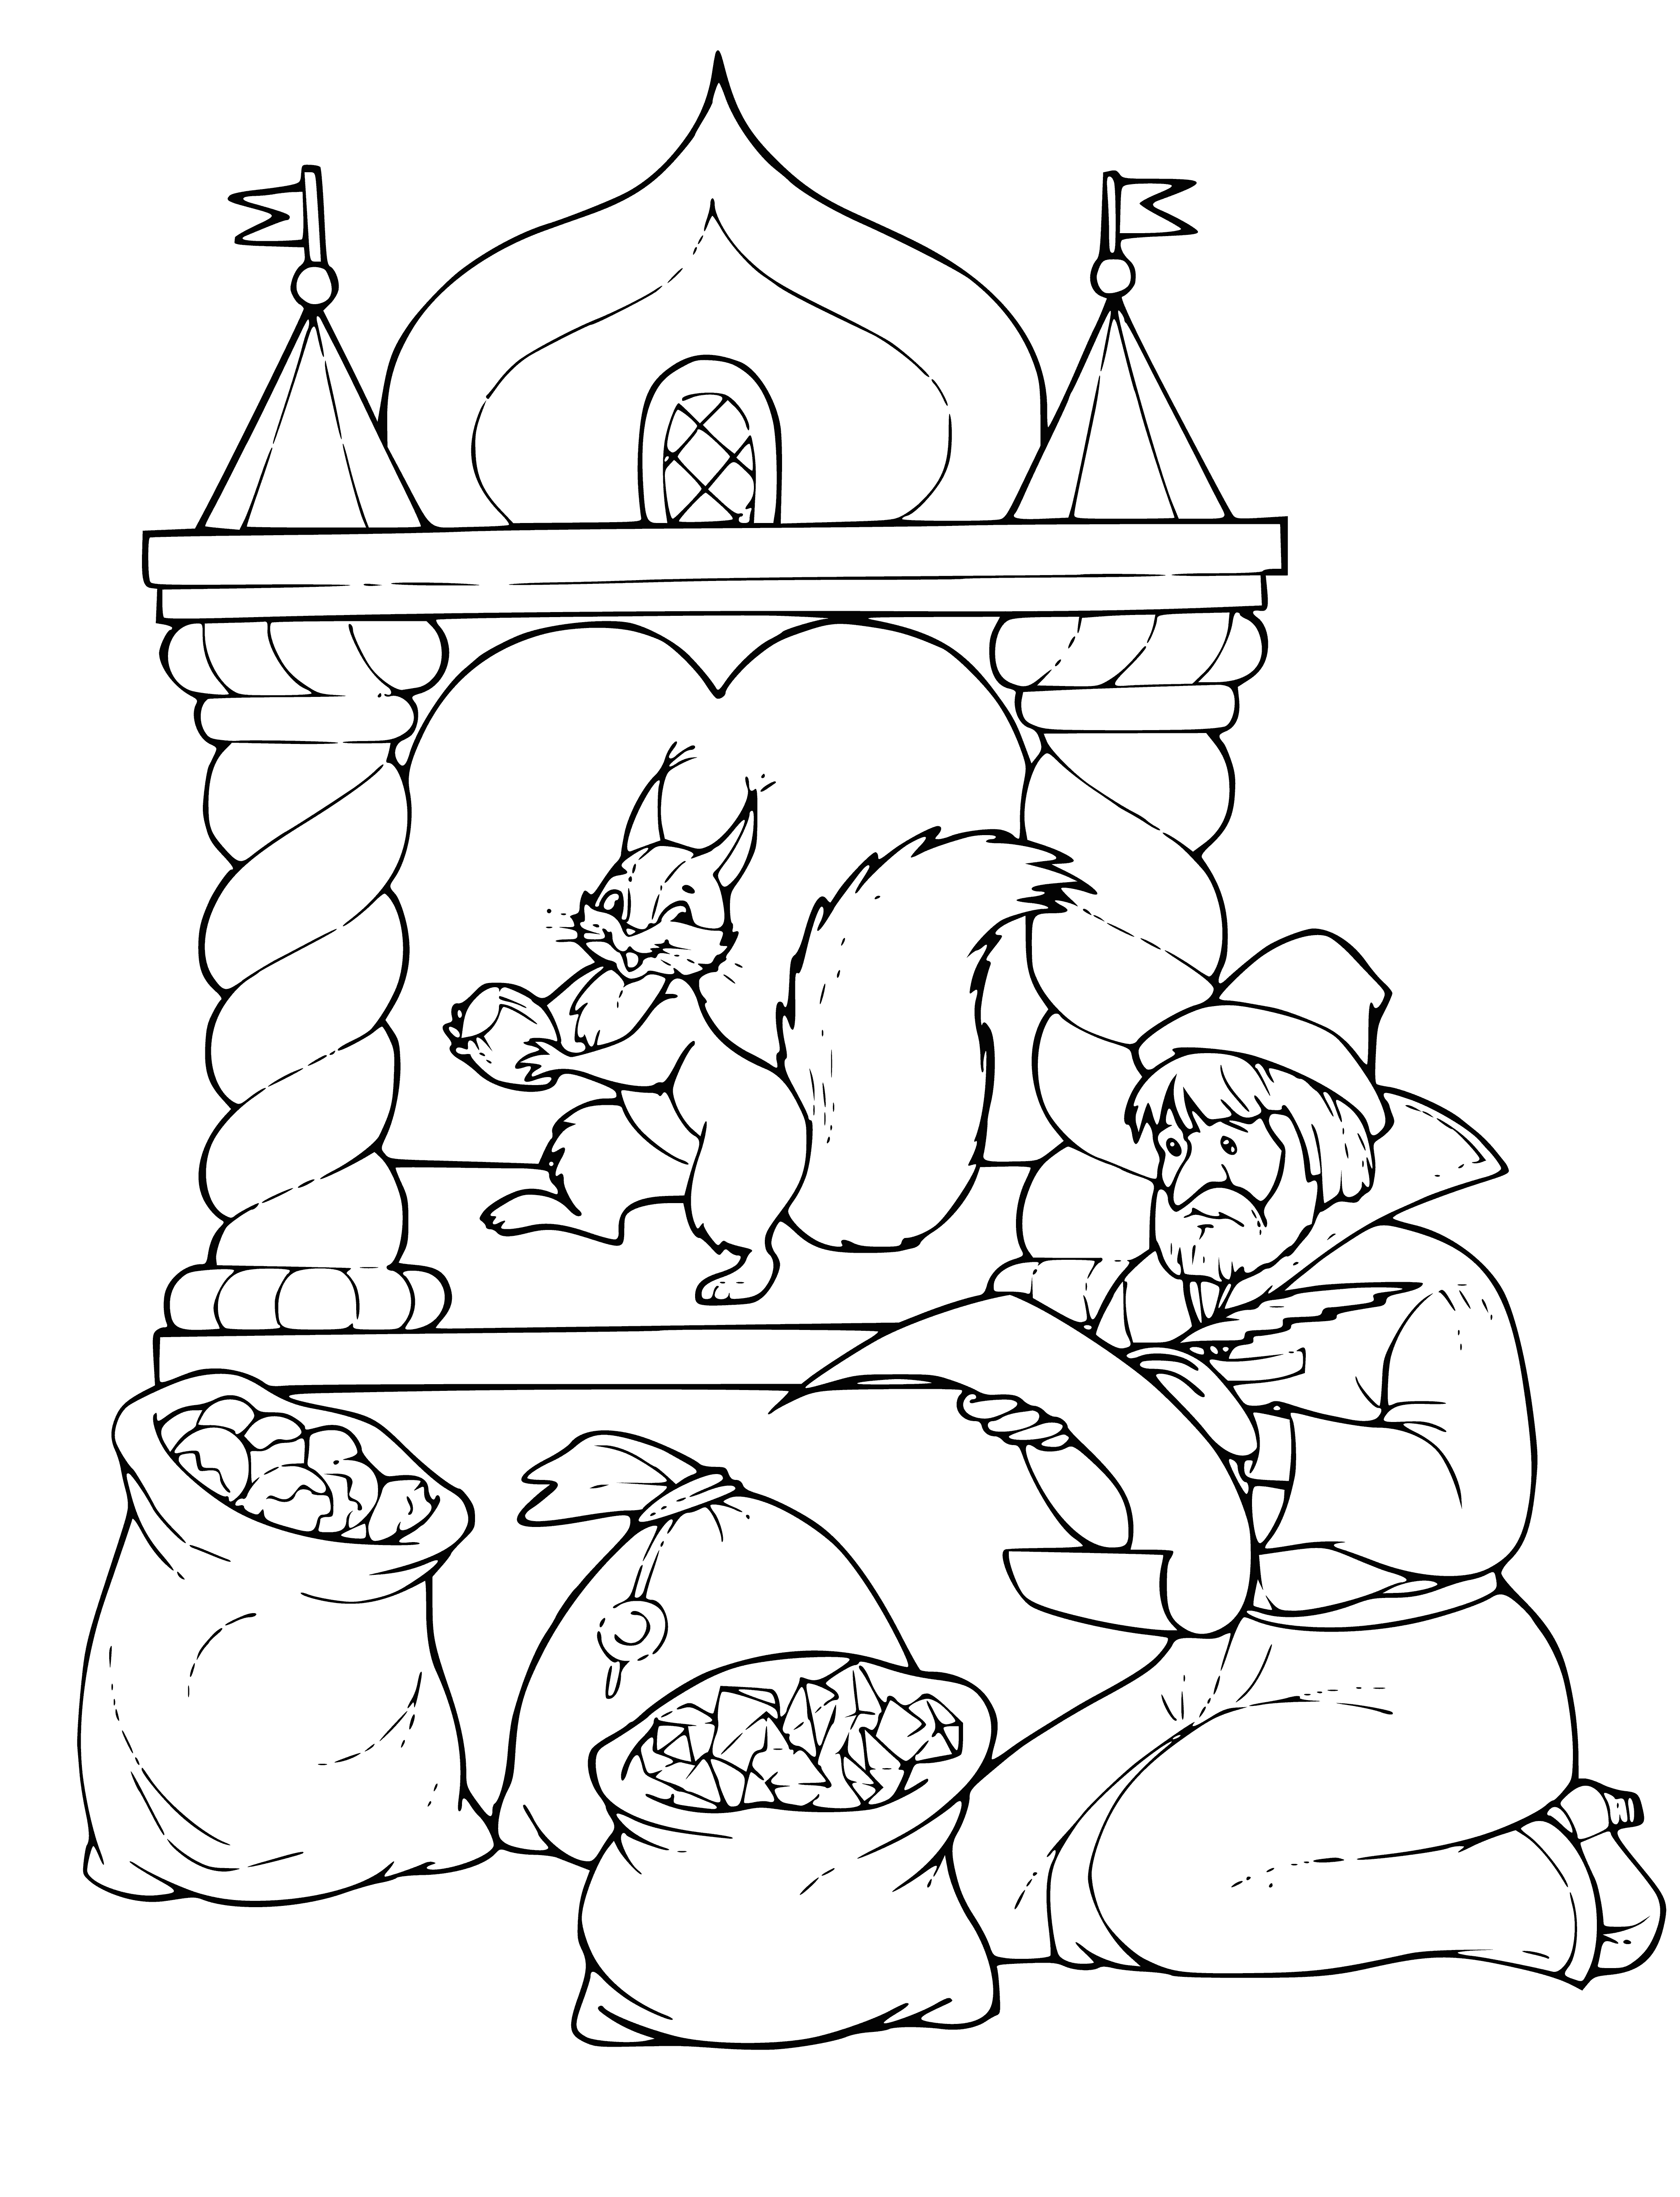 coloring page: Squirrel peers through glass door at a bowl of nuts, paws pressed against it - story of Pushkin's "Squirrel in a Crystal House".